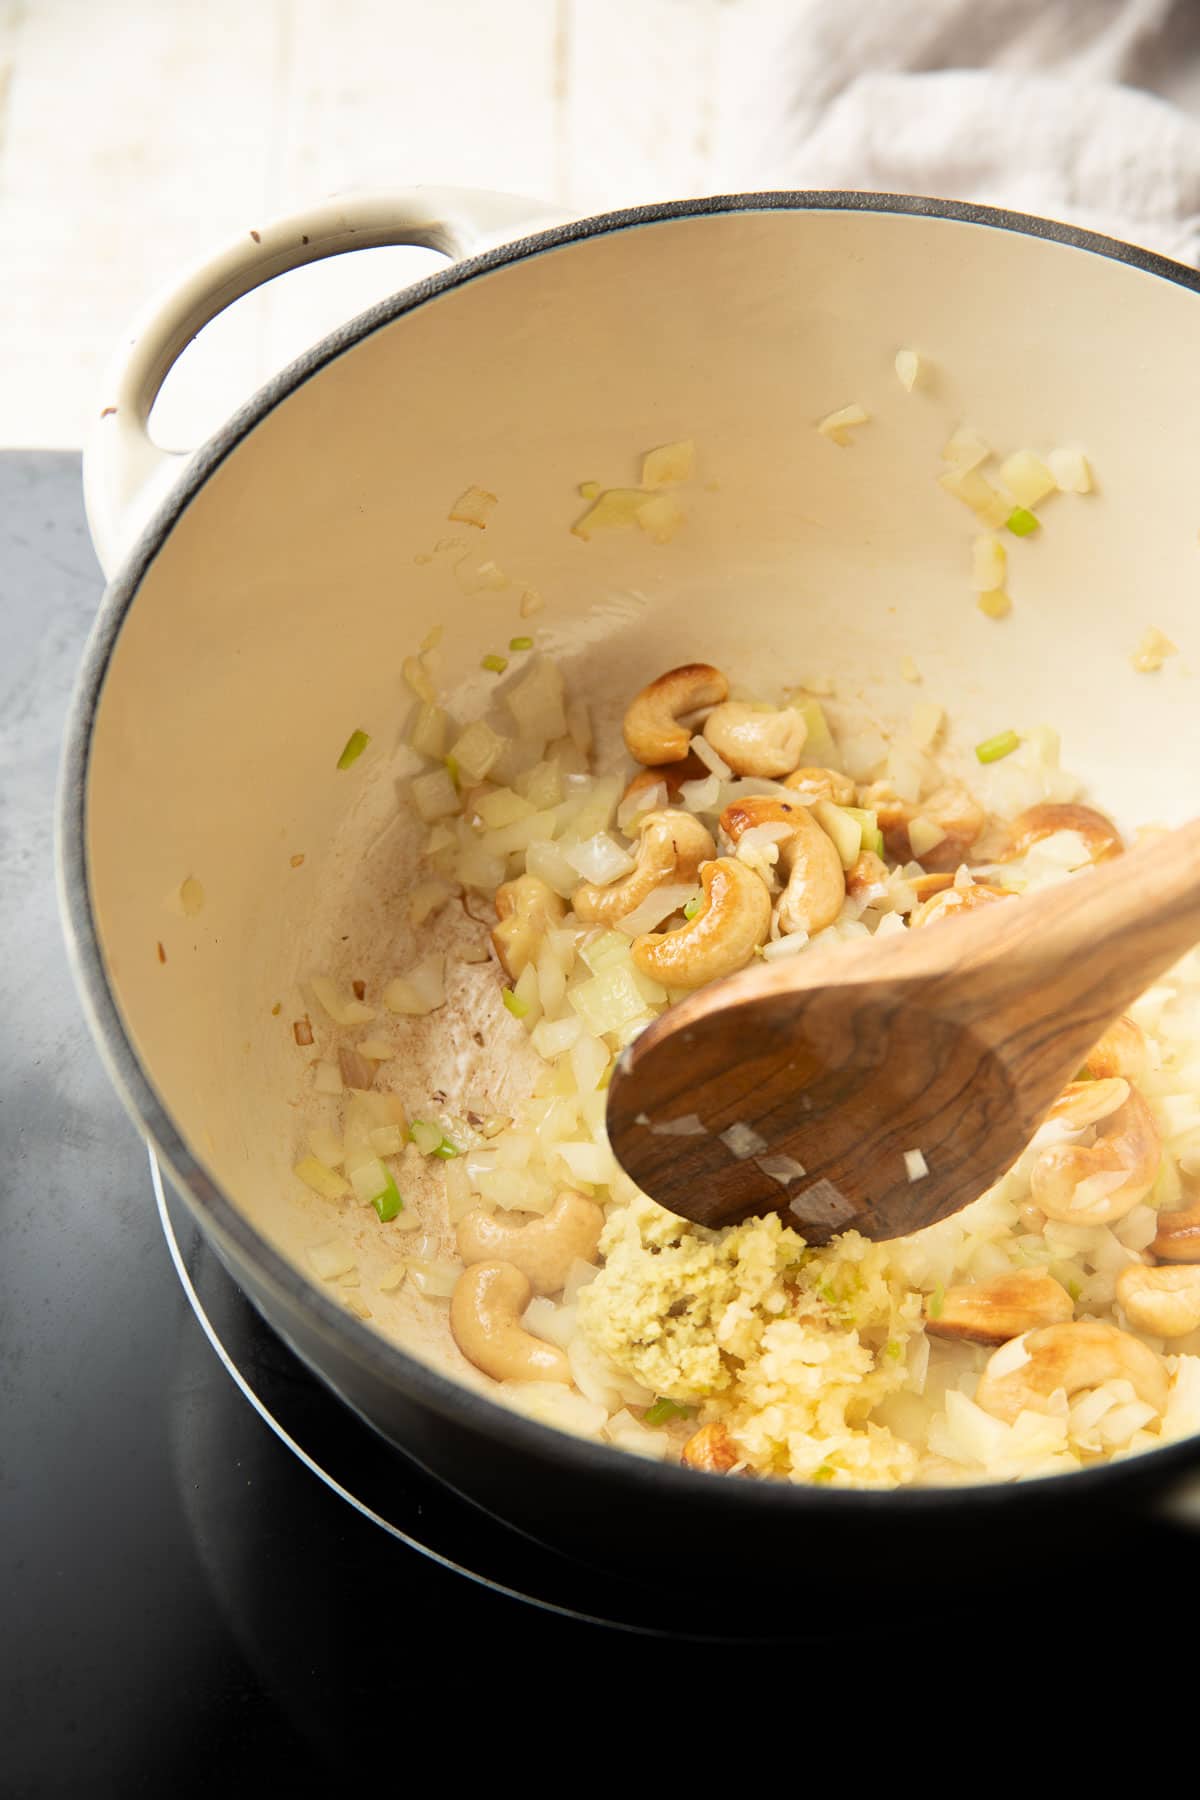 Ginger and garlic cooking in a pot with cashews and diced onions.